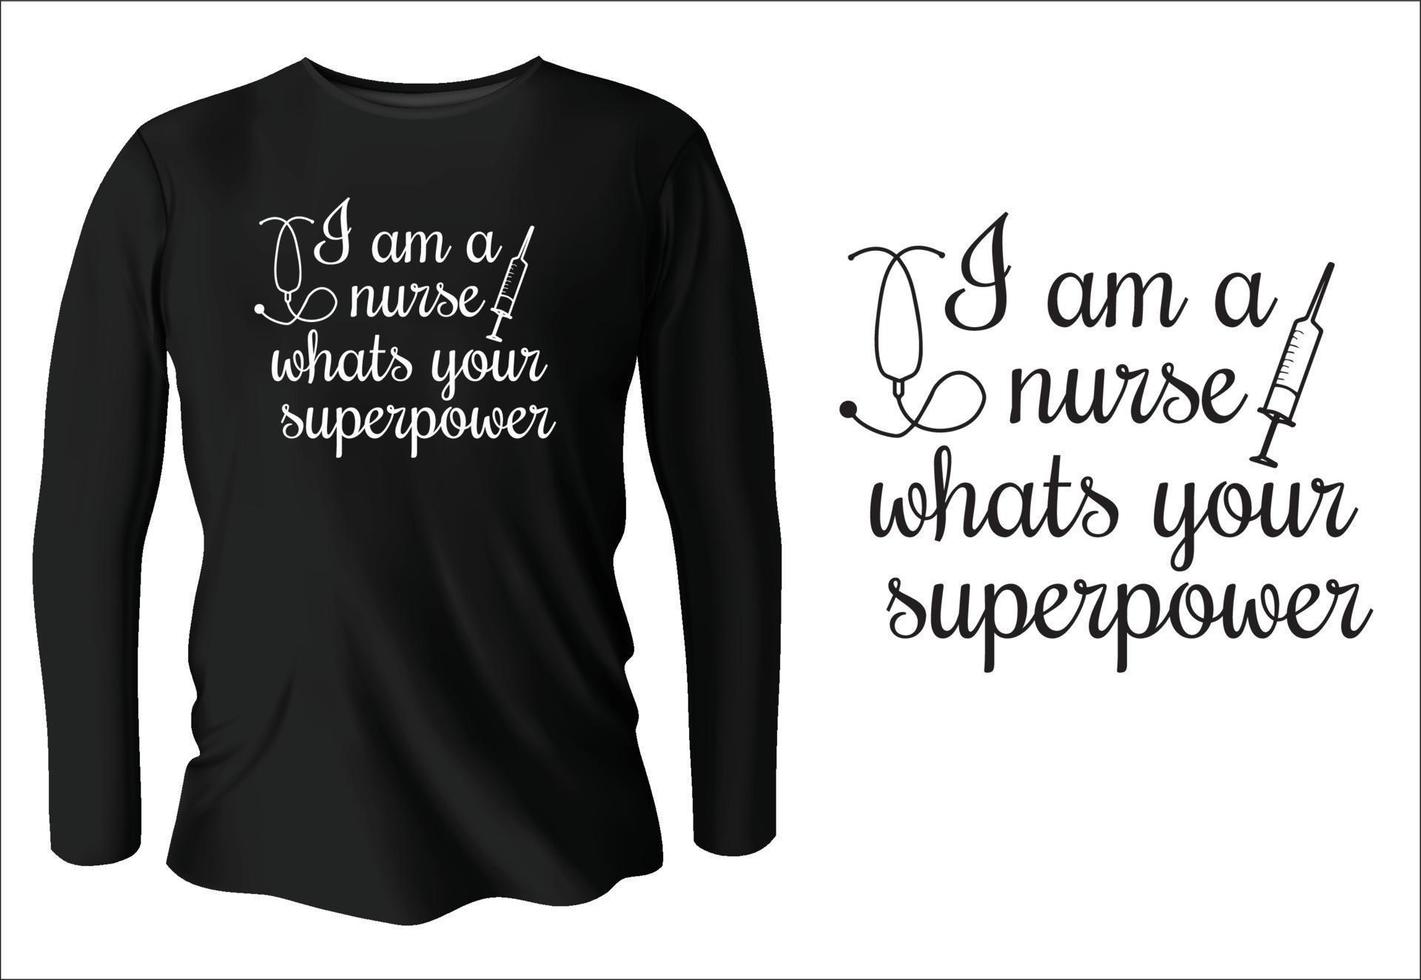 I am a nurse what's your superpower t-shirt design with vector